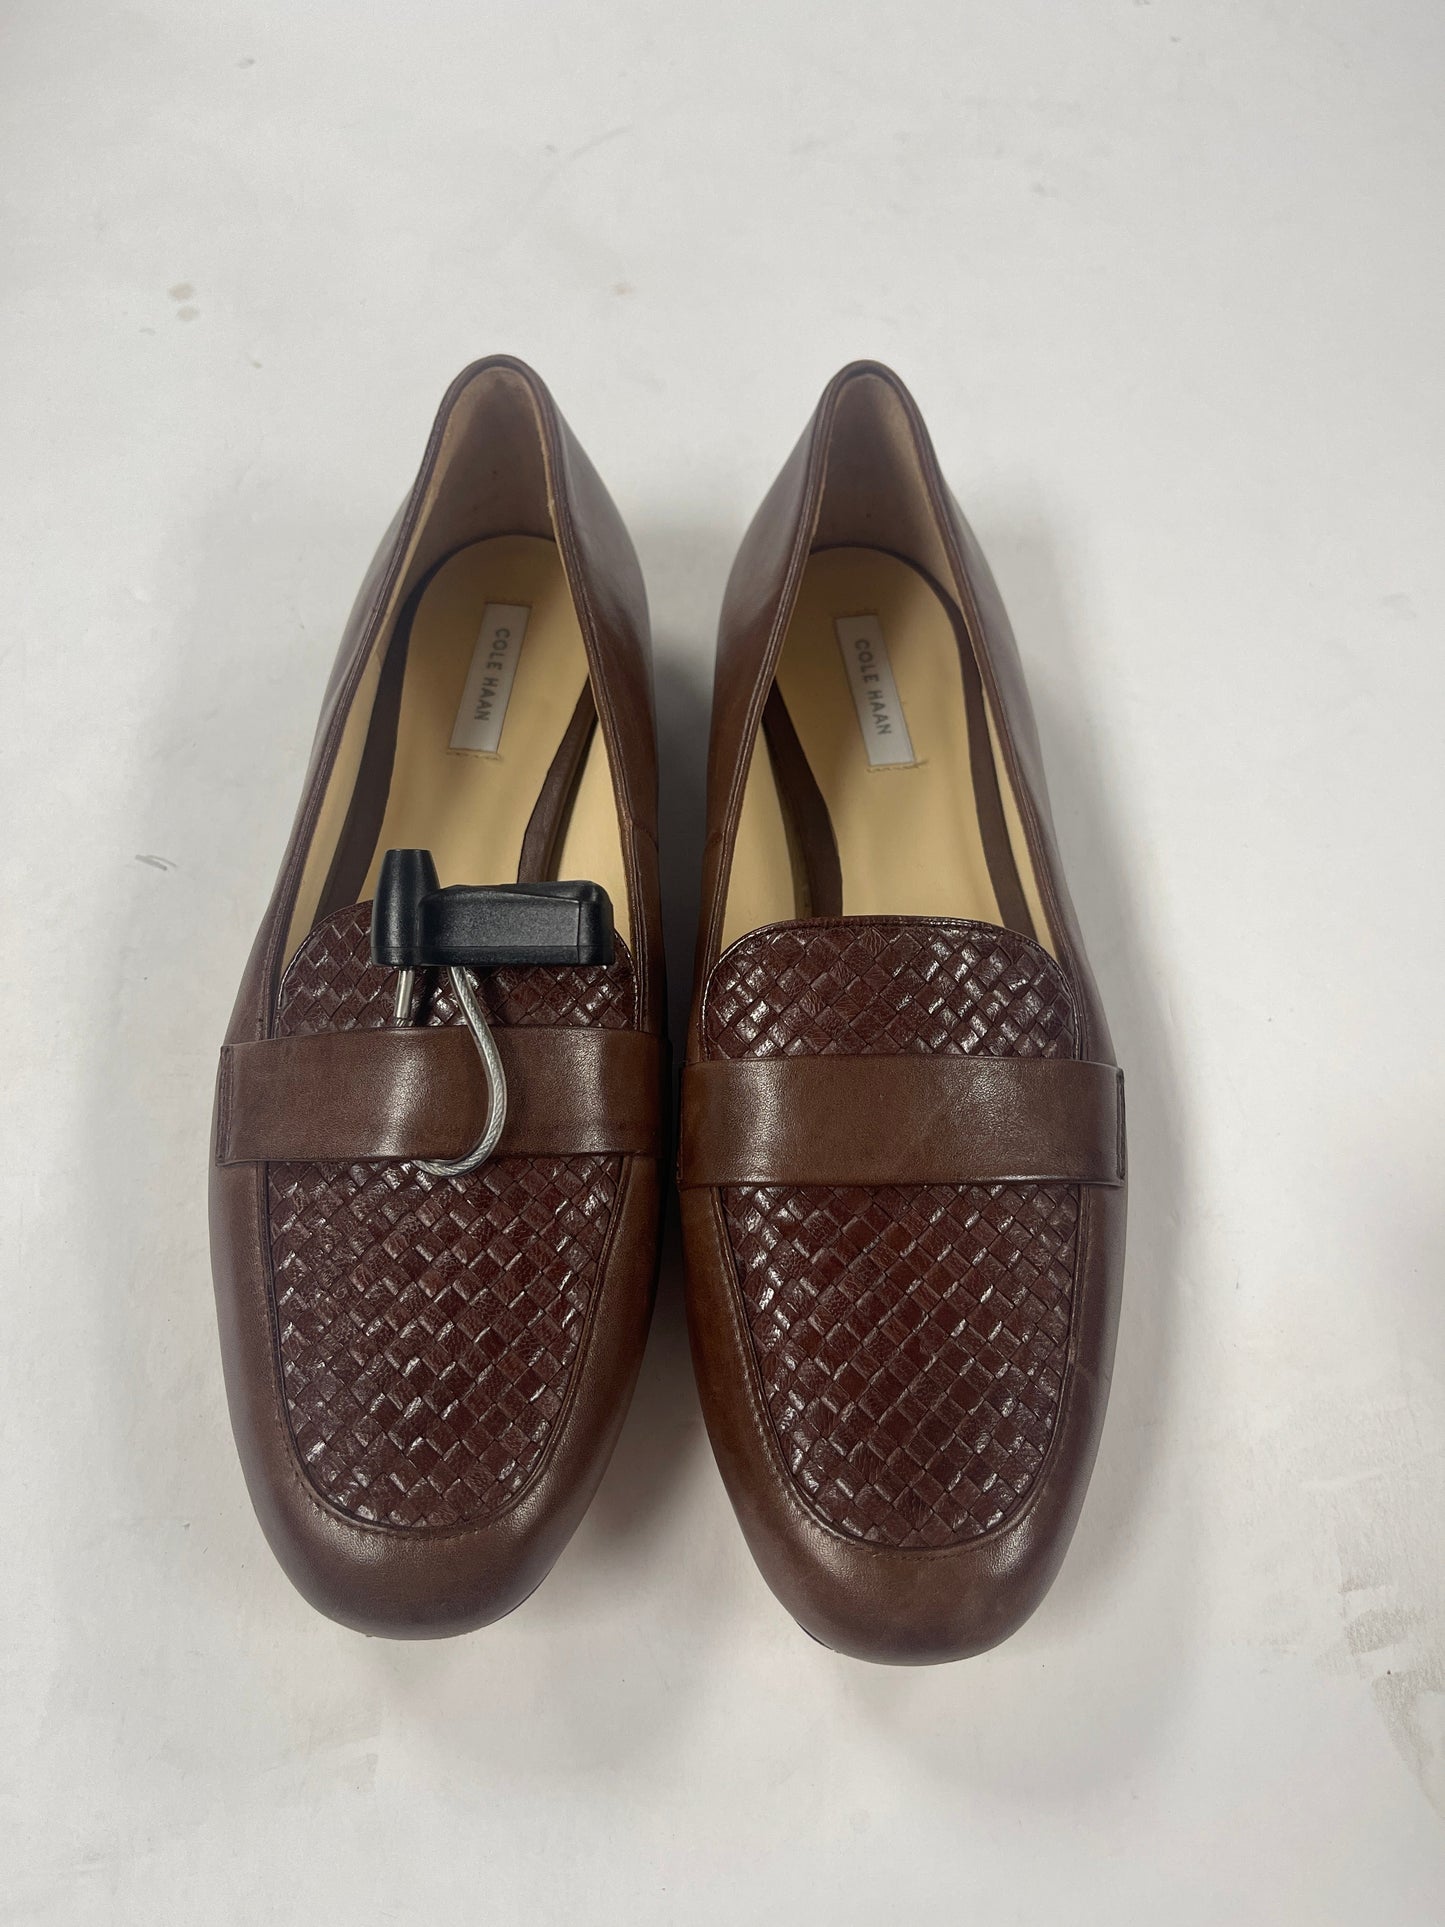 Brown Shoes Flats Cole-haan, Size 8